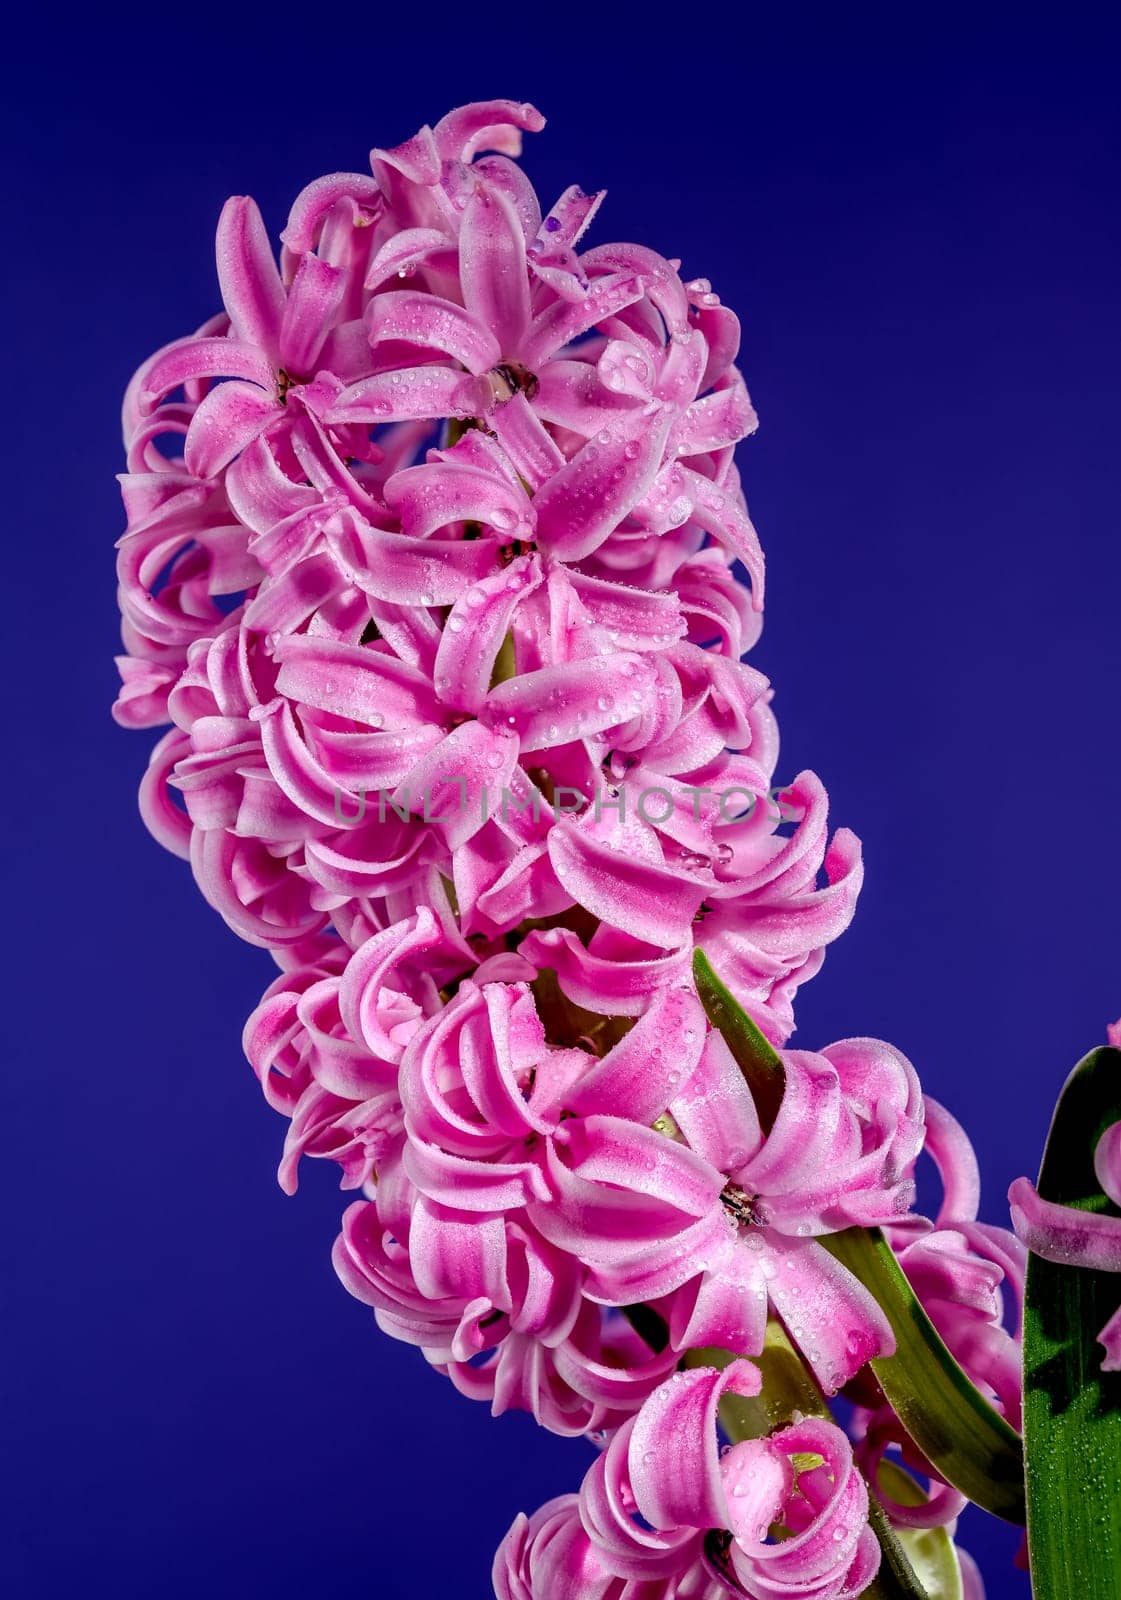 Pink Hyacinth flower on a blue background by Multipedia